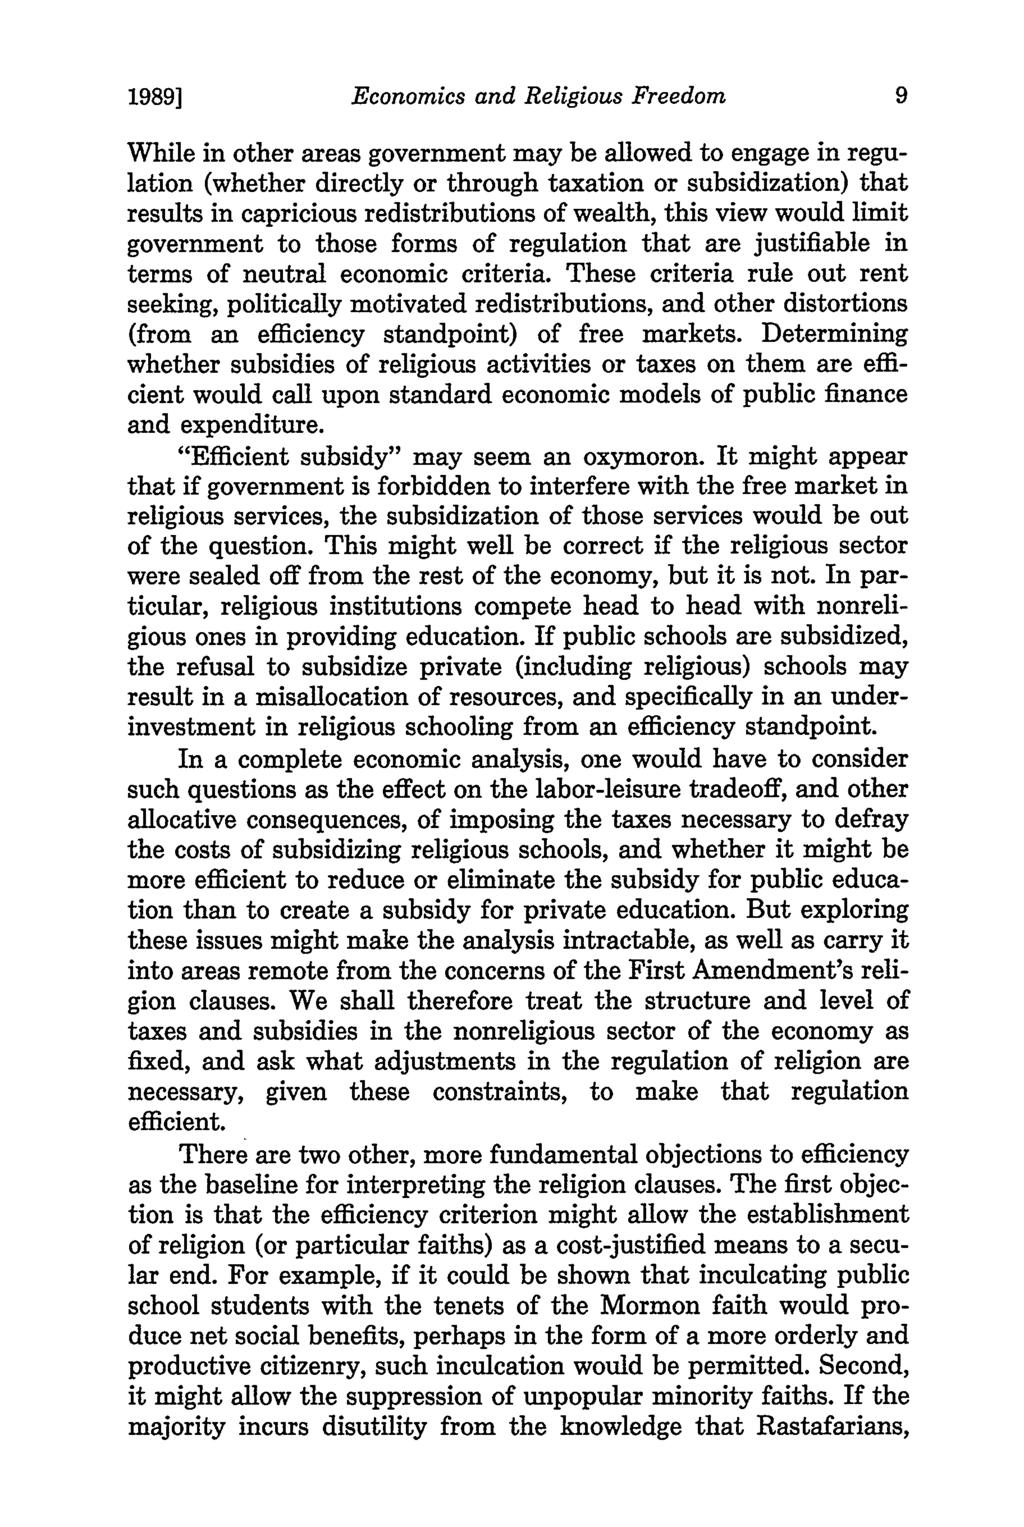 1989] Economics and Religious Freedom While in other areas government may be allowed to engage in regulation (whether directly or through taxation or subsidization) that results in capricious